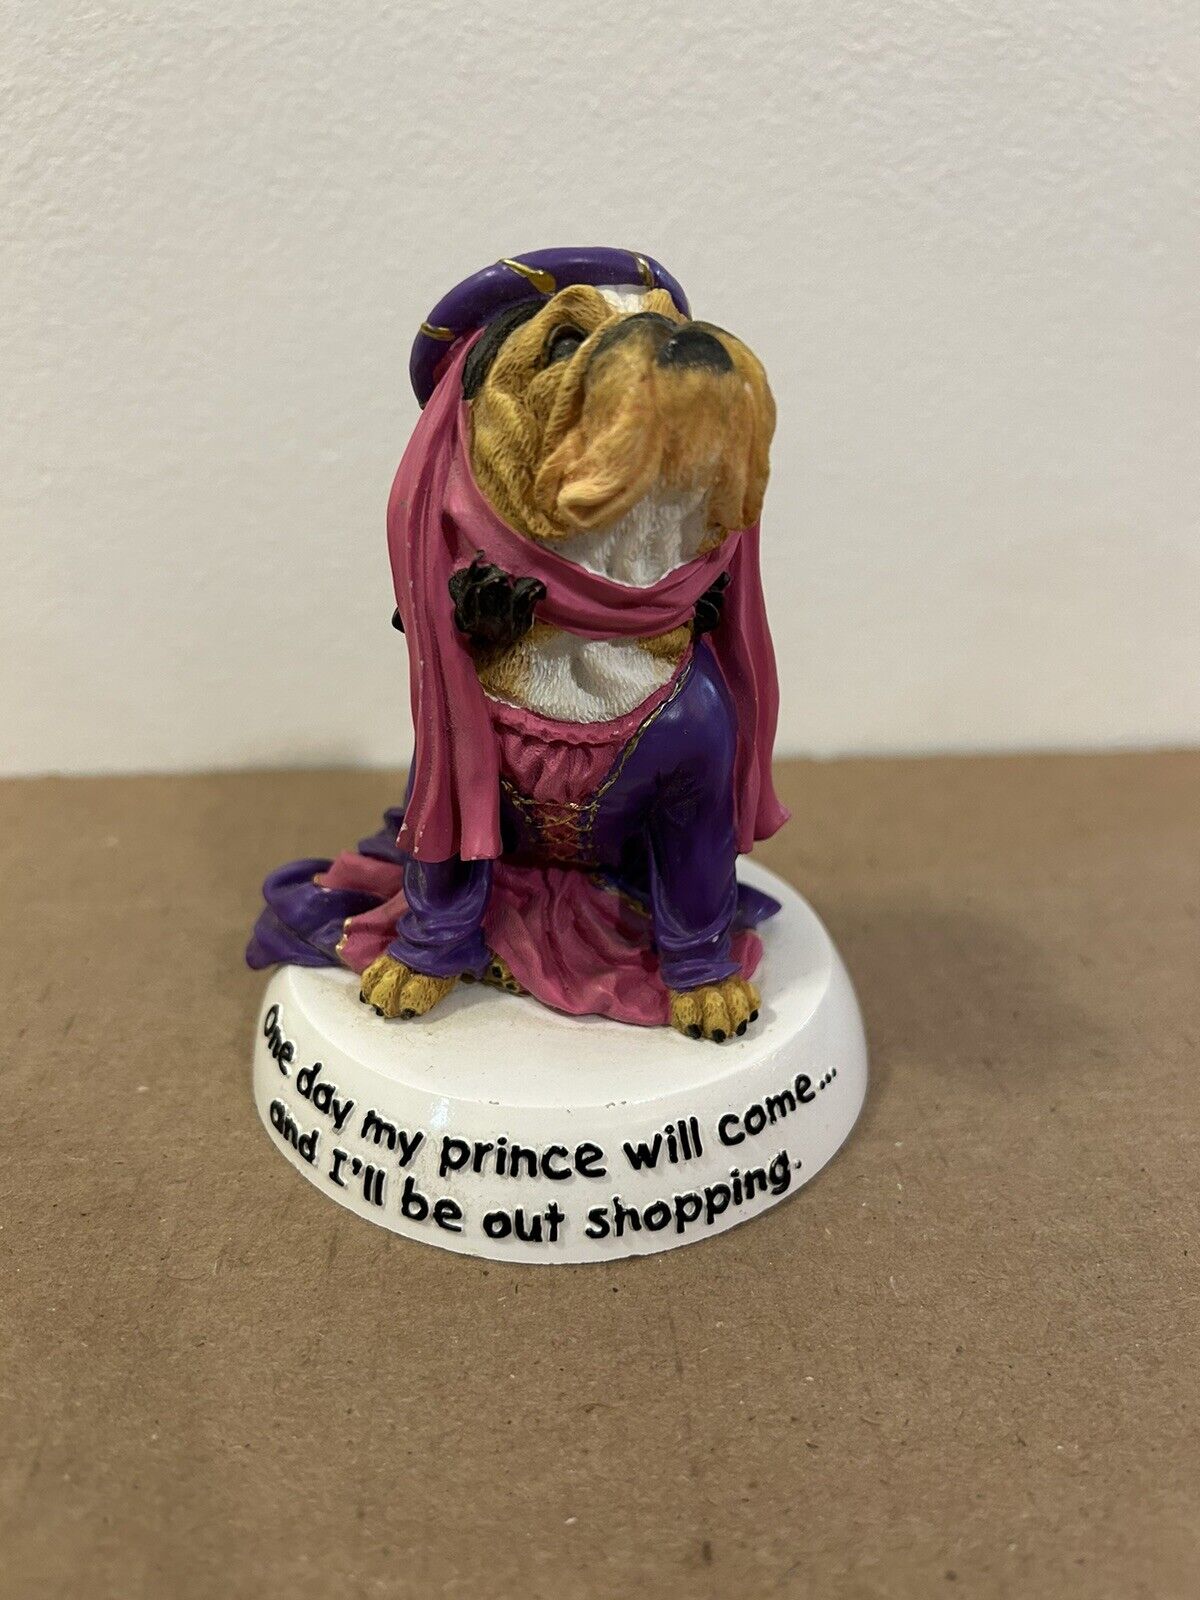 Zelda Wisdom Bulldog Figurine  “One day my prince will come..and I’ll be out Sho